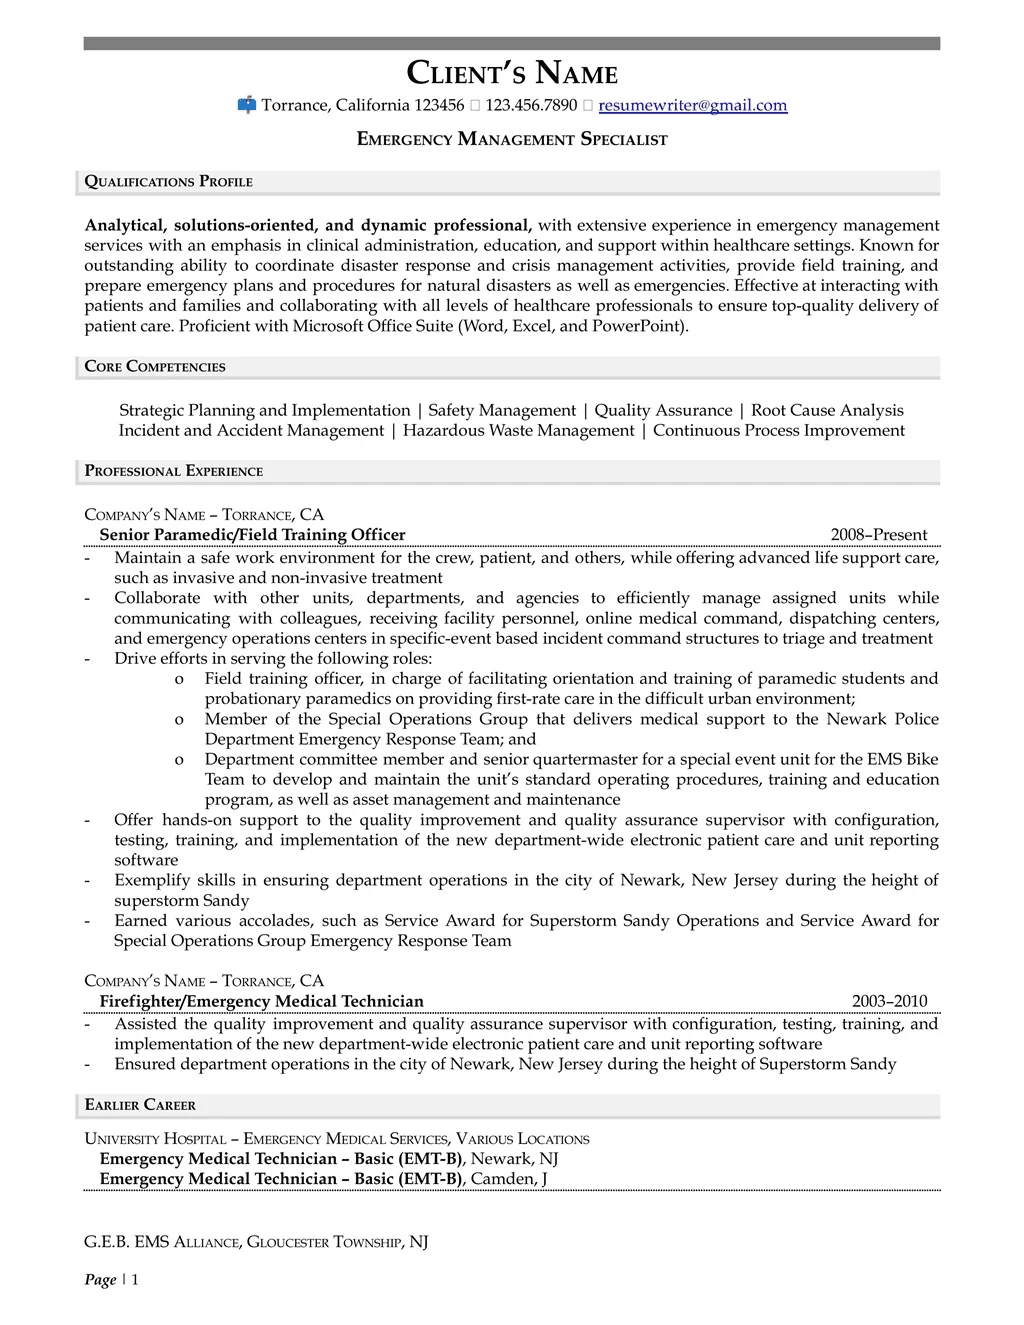 Emergency Management Resume Example Page One